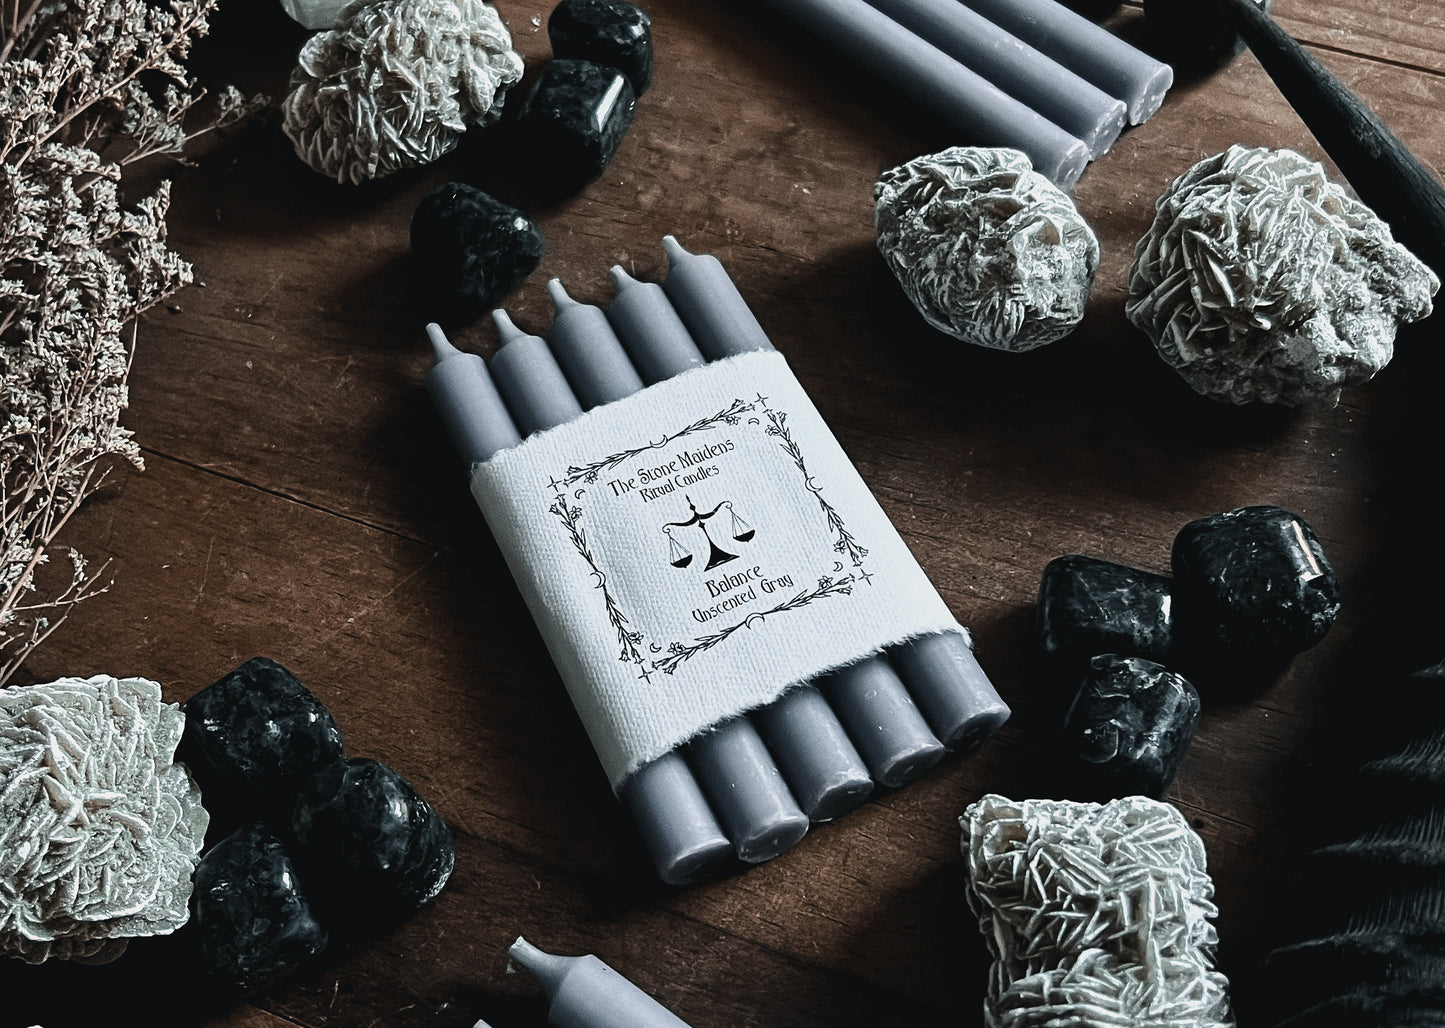 unscented grey ritual candles arranged on a dark wooden altar surrounded by crystals, sold at The Stone Maidens